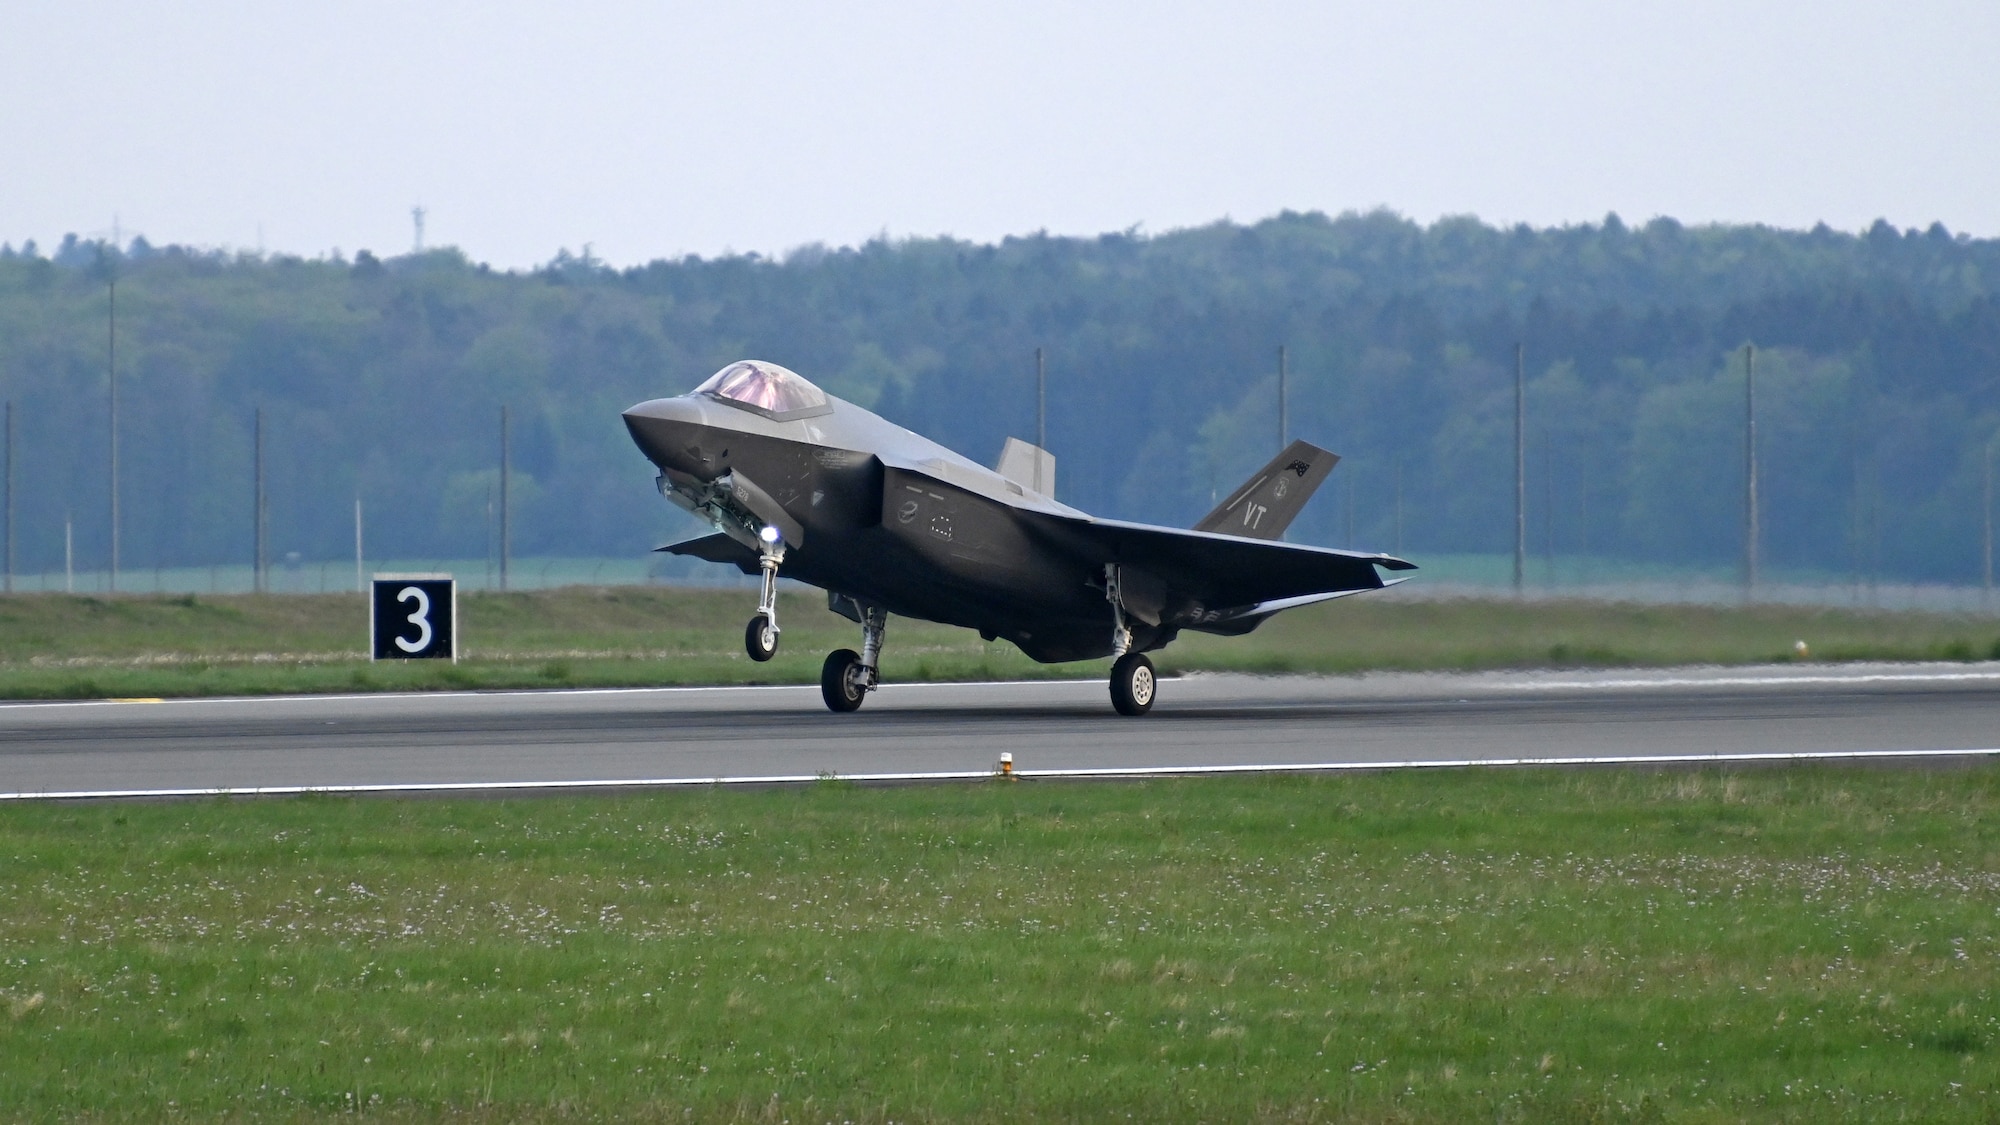 A U.S. Air Force F-35A Lightning II fifth generation fighter aircraft, assigned to the Vermont Air National Guard’s 158th Fighter Wing, lands at Spangdahlem Air Base, Germany, May 02, 2022. The Vermont Air National Guard team will take over the Enhanced Air Policing mission for Hill Air Force Base’s 388th Fighter Wing,  continuing NATO’s Enhanced Air Policing mission along the Eastern flank. (U.S. Air Force photo by Tech. Sgt. Anthony Plyler)